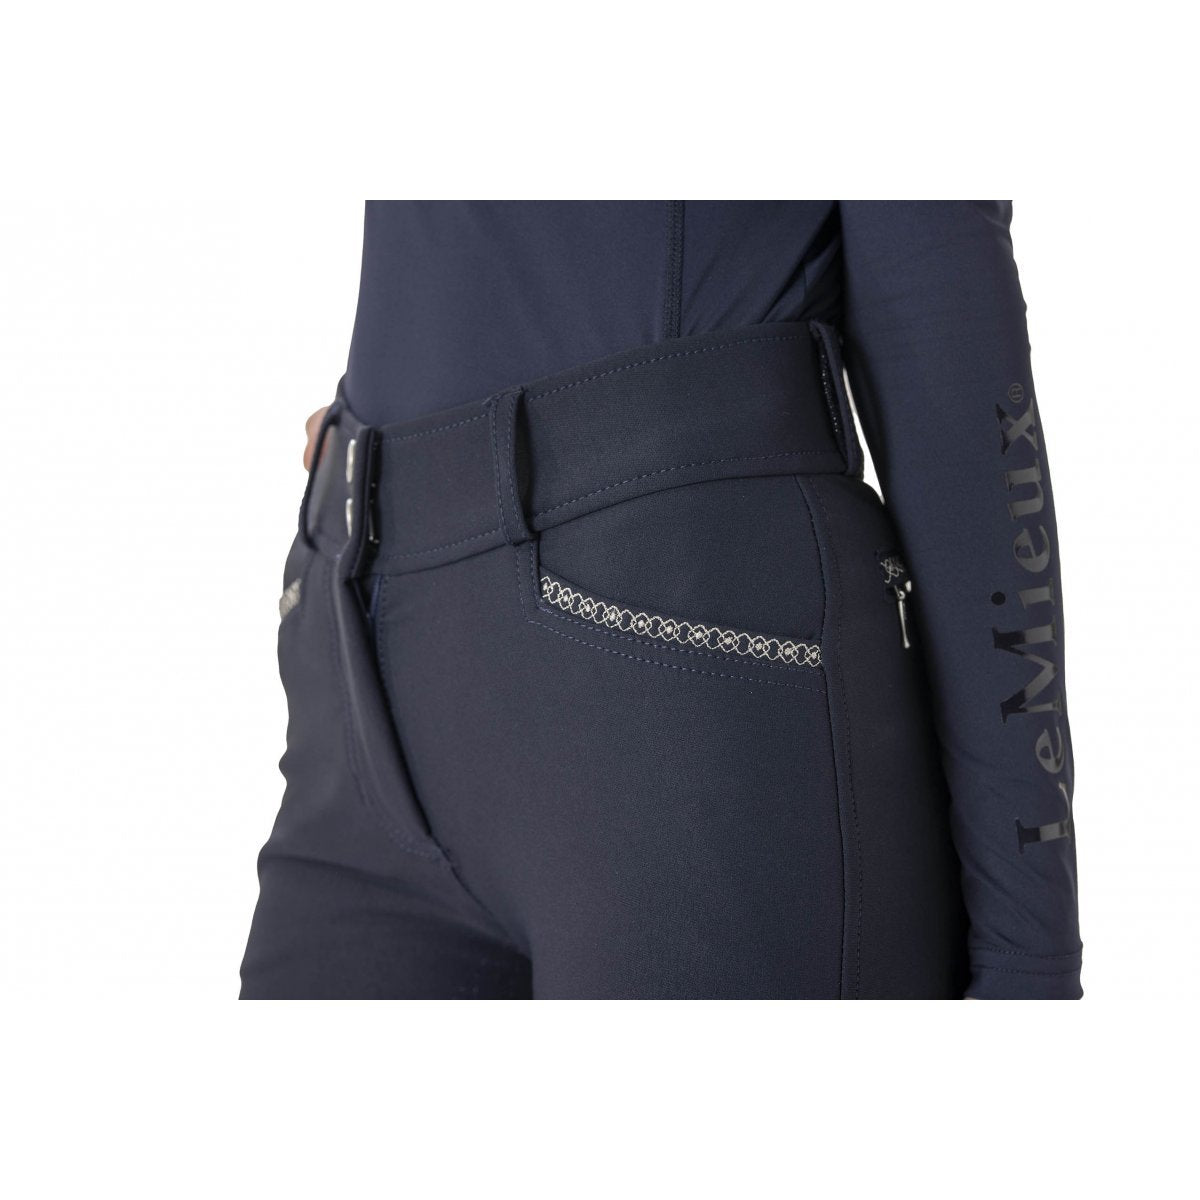 LeMieux Young Rider Breech-Southern Sport Horses-The Equestrian